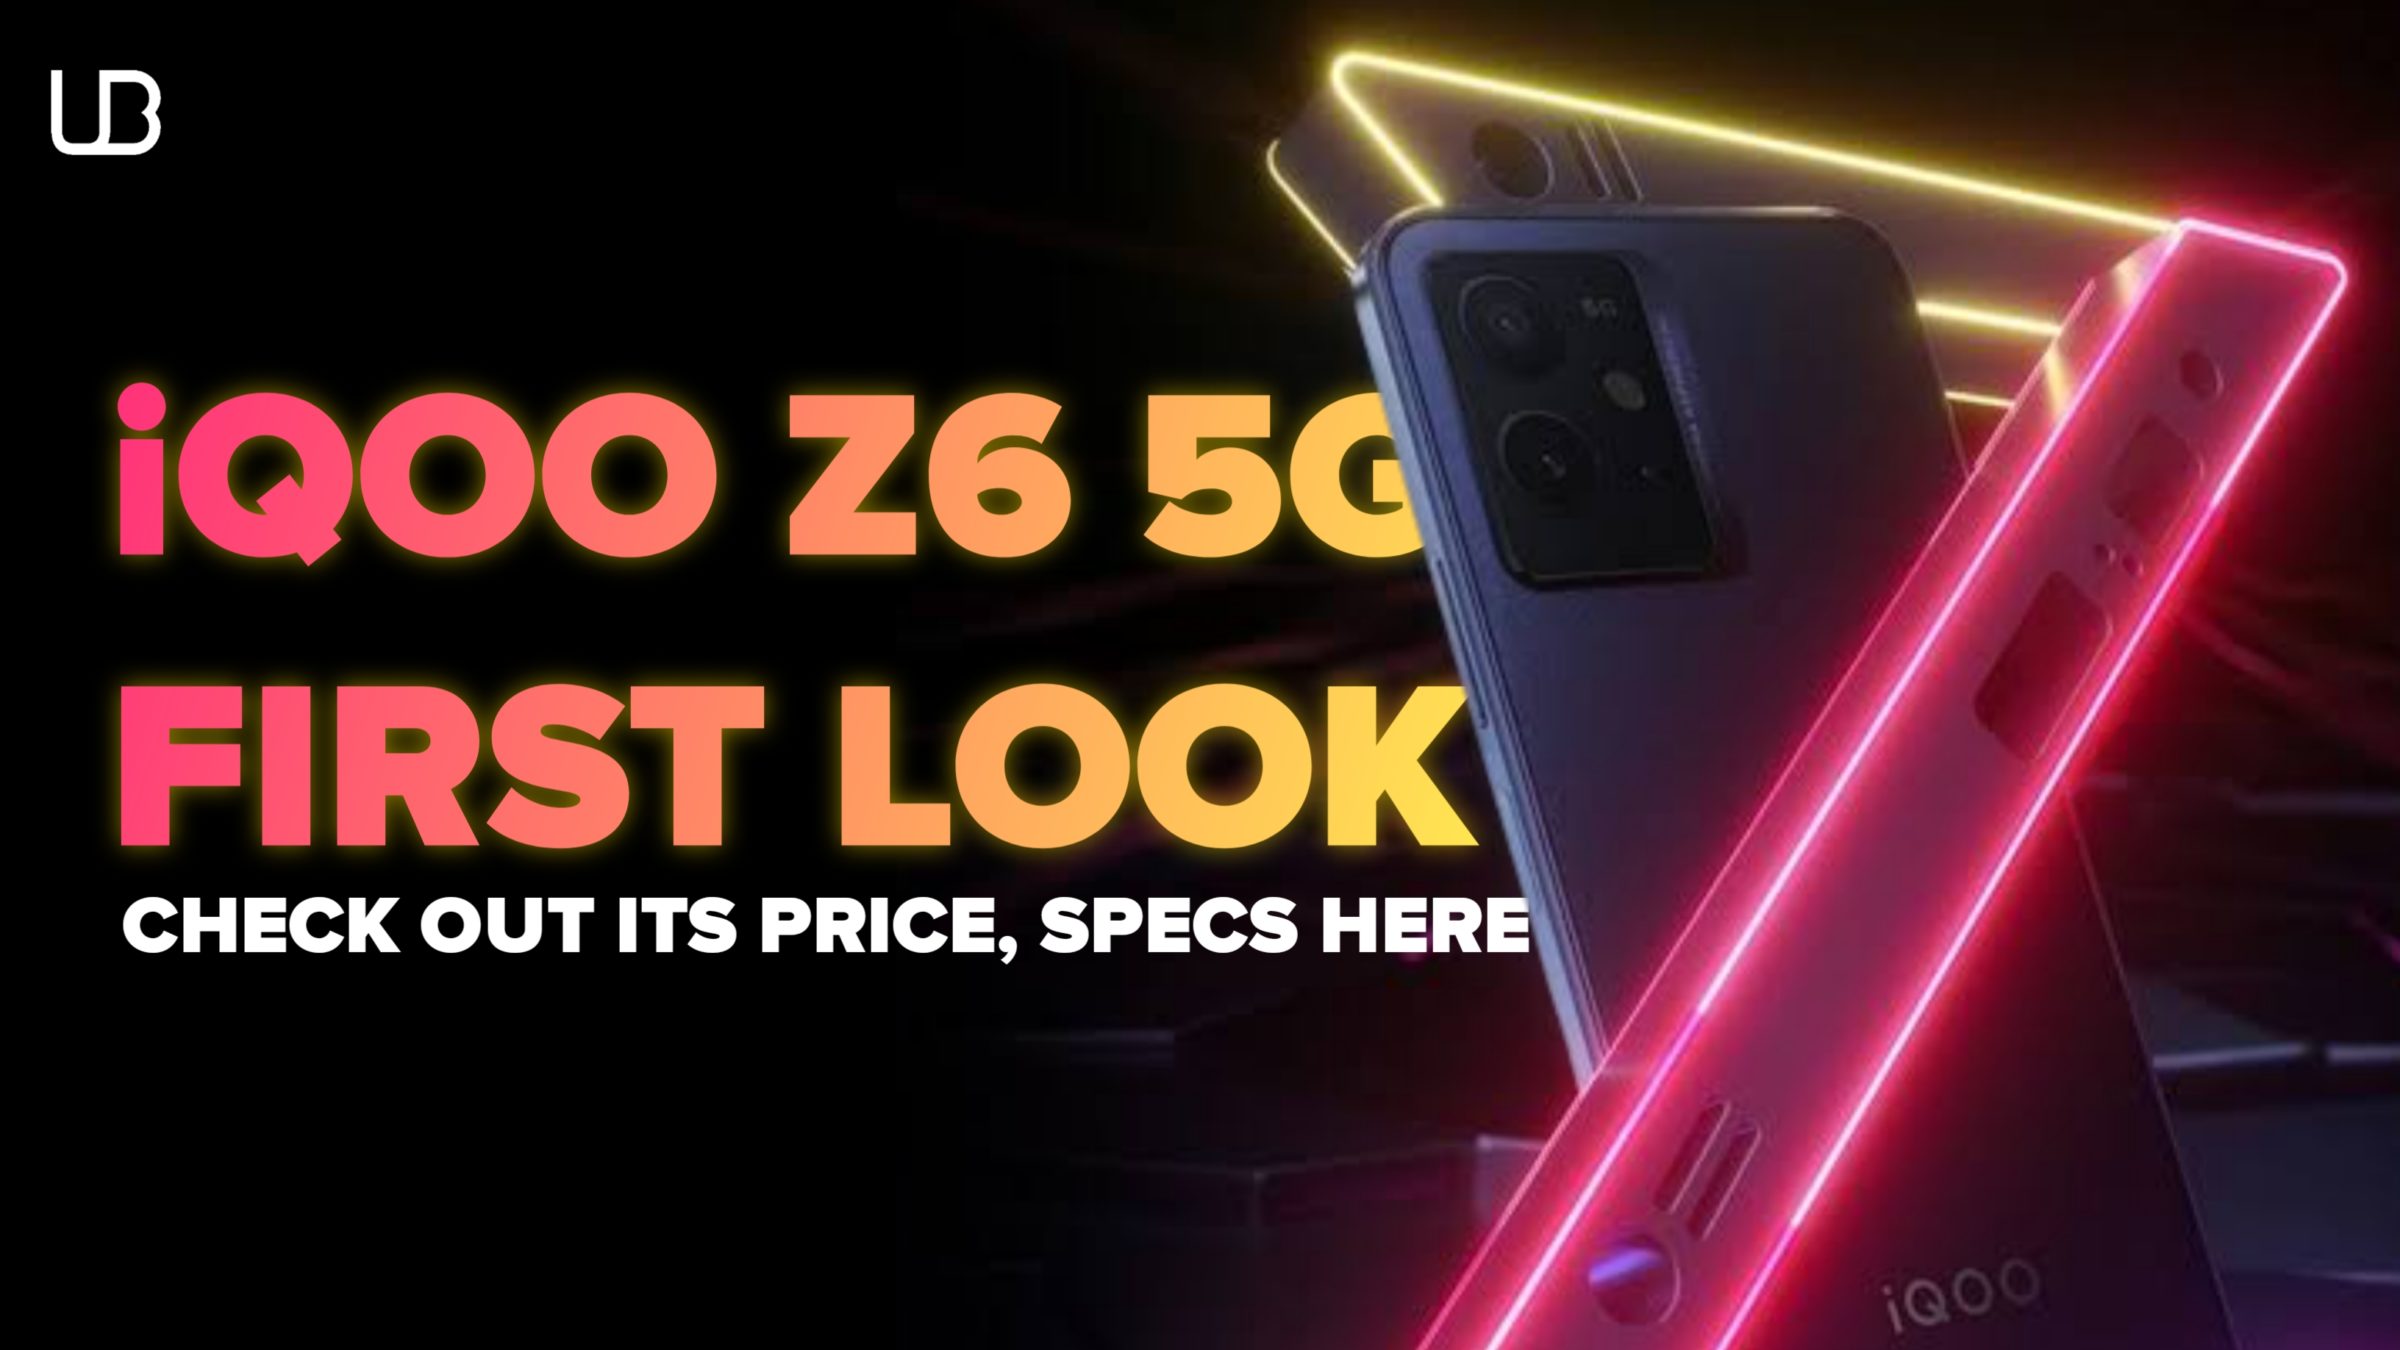 iQOO Z6 5G First Look - Check out its Price, Specs here